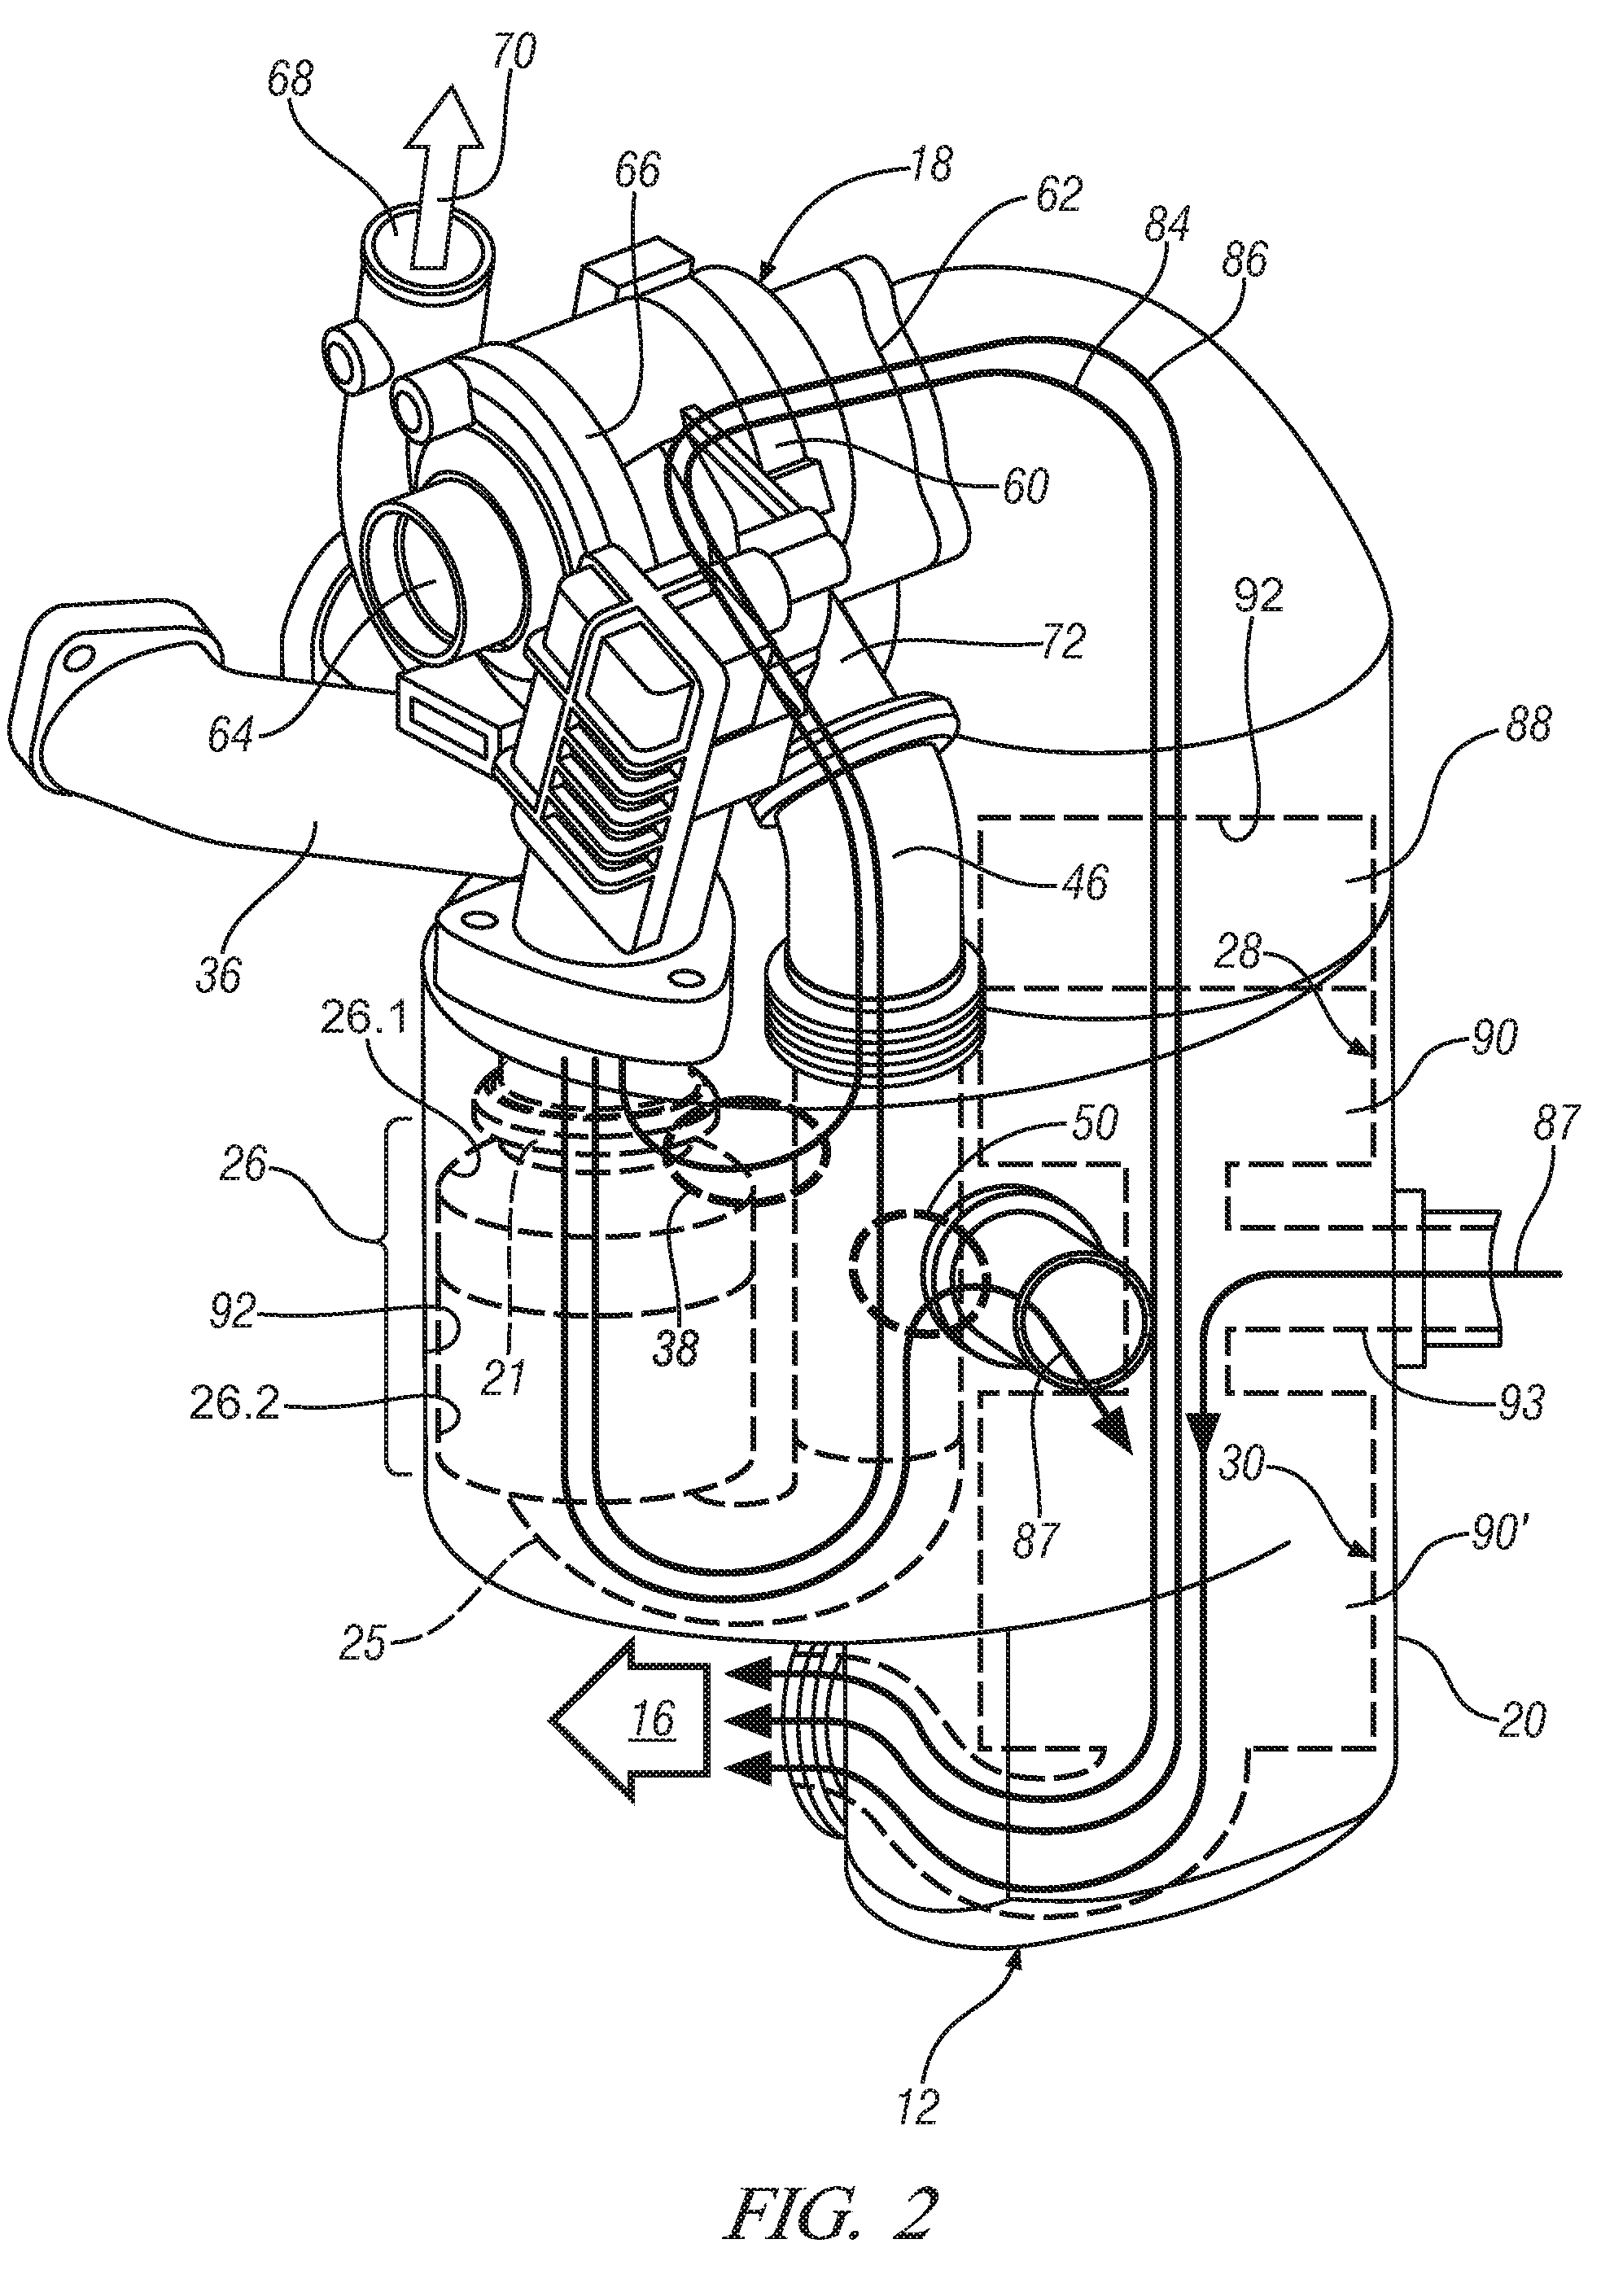 Closely coupled exhaust aftertreatment system for an internal combustion engine having twin turbochargers